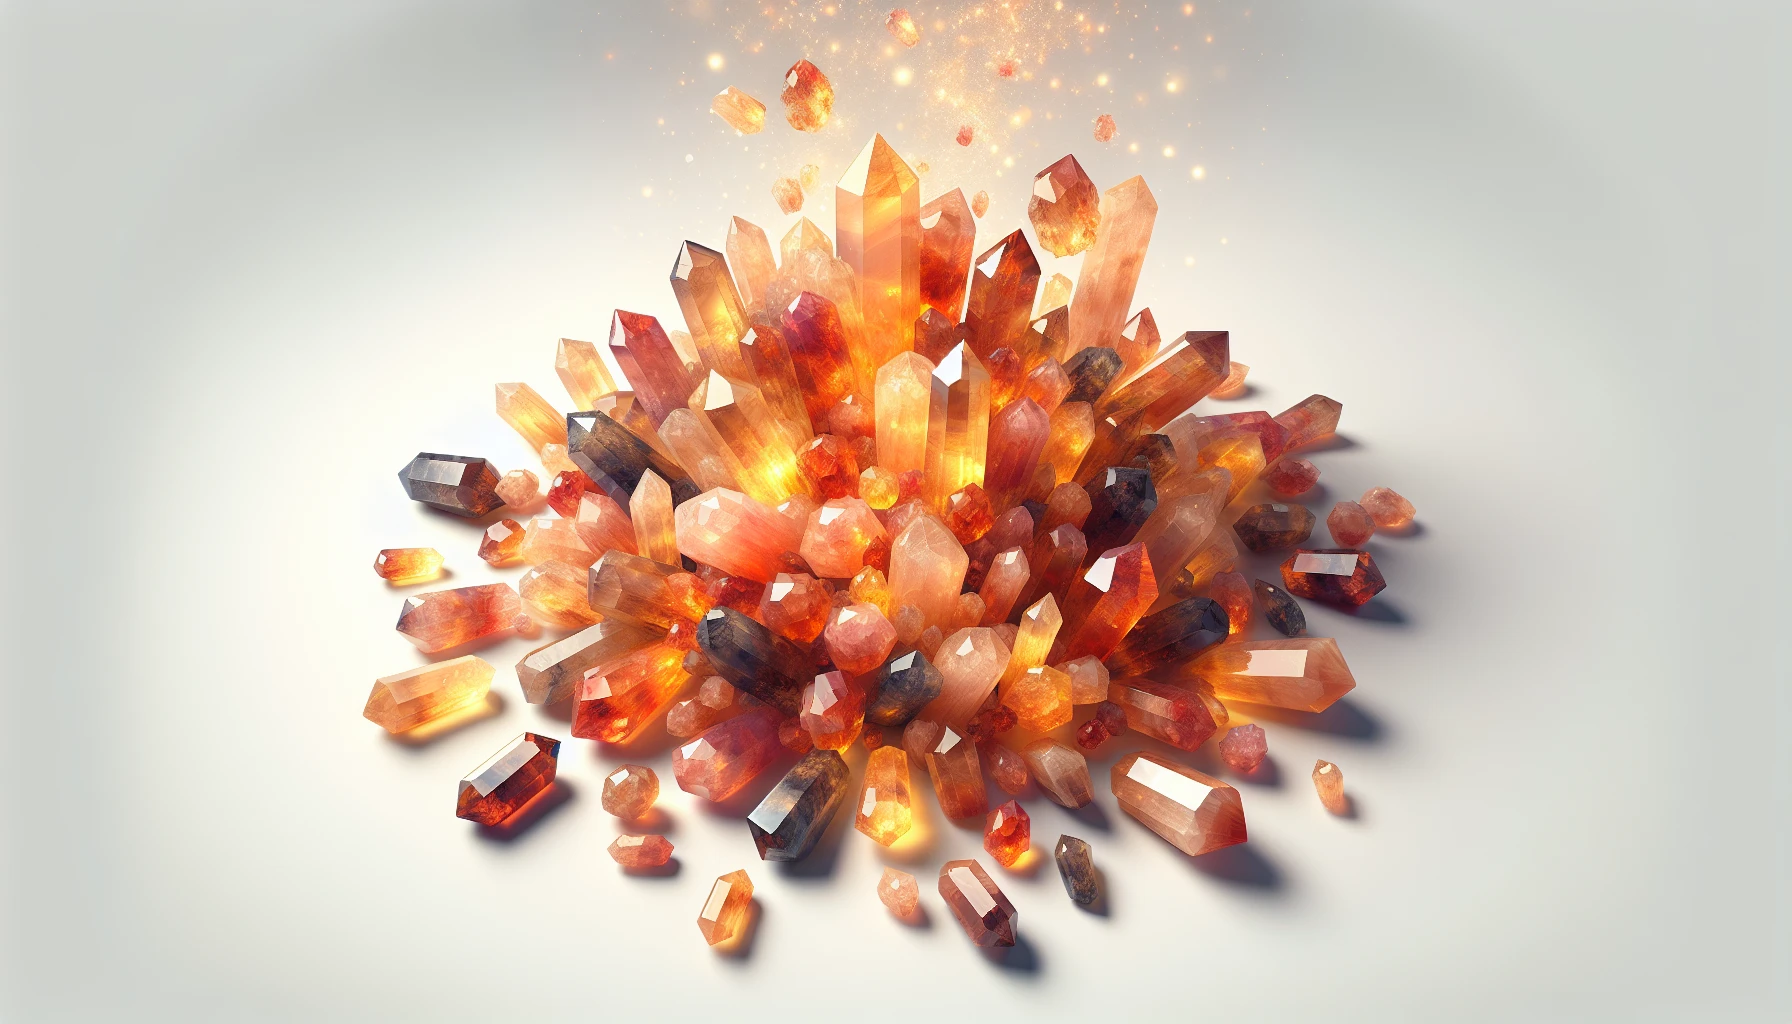 Various shades of gold, red, orange, and brown sunstone crystals